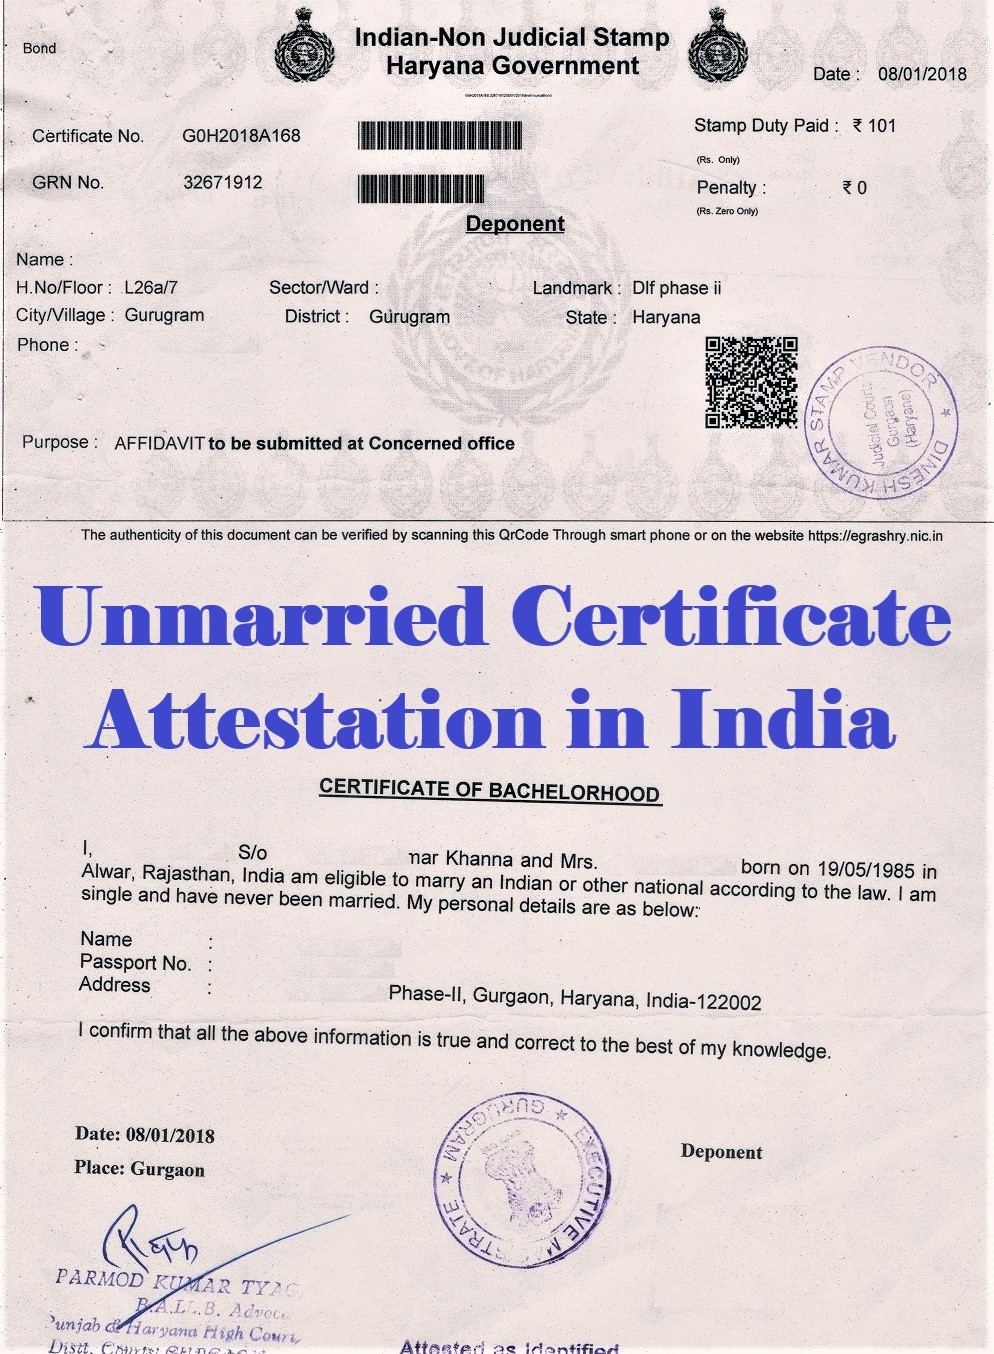 Unmarried Certificate Attestation from Uganda Embassy